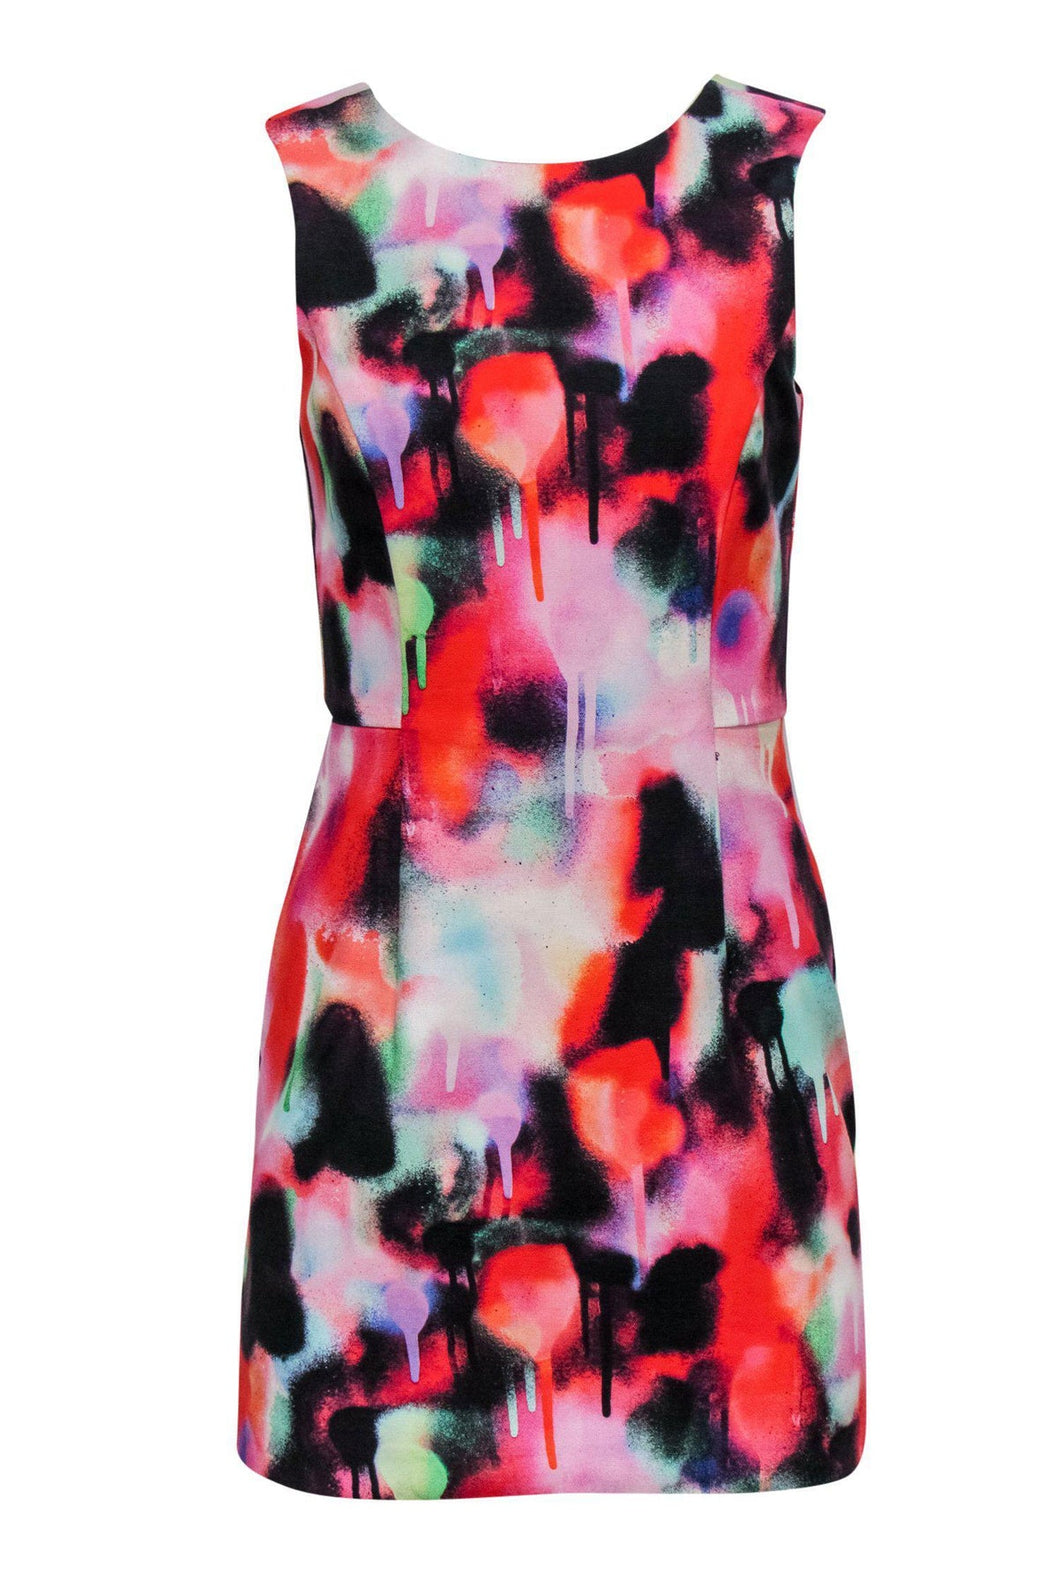 French Connection Spray Paint Dress- 12